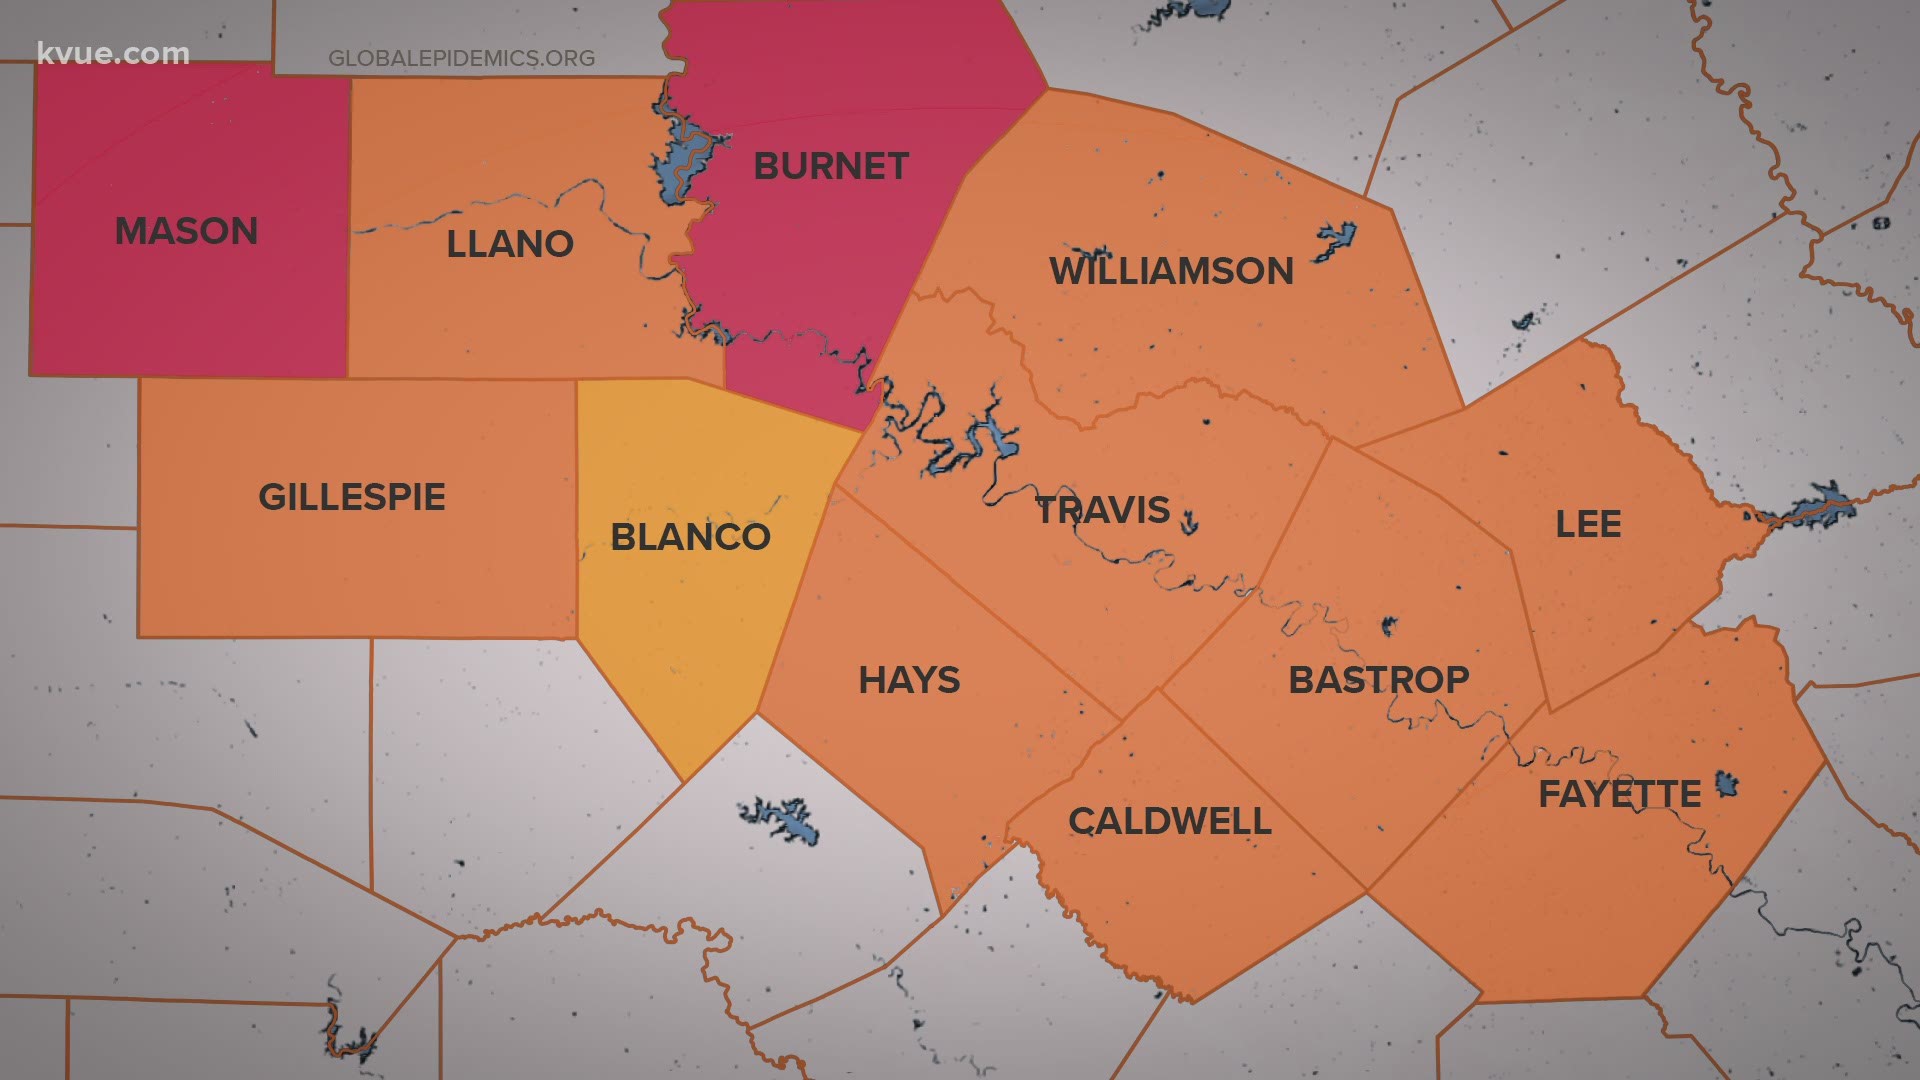 New data from a website created by the Brown University School of Public Health shows that many Texas counties are high-risk.